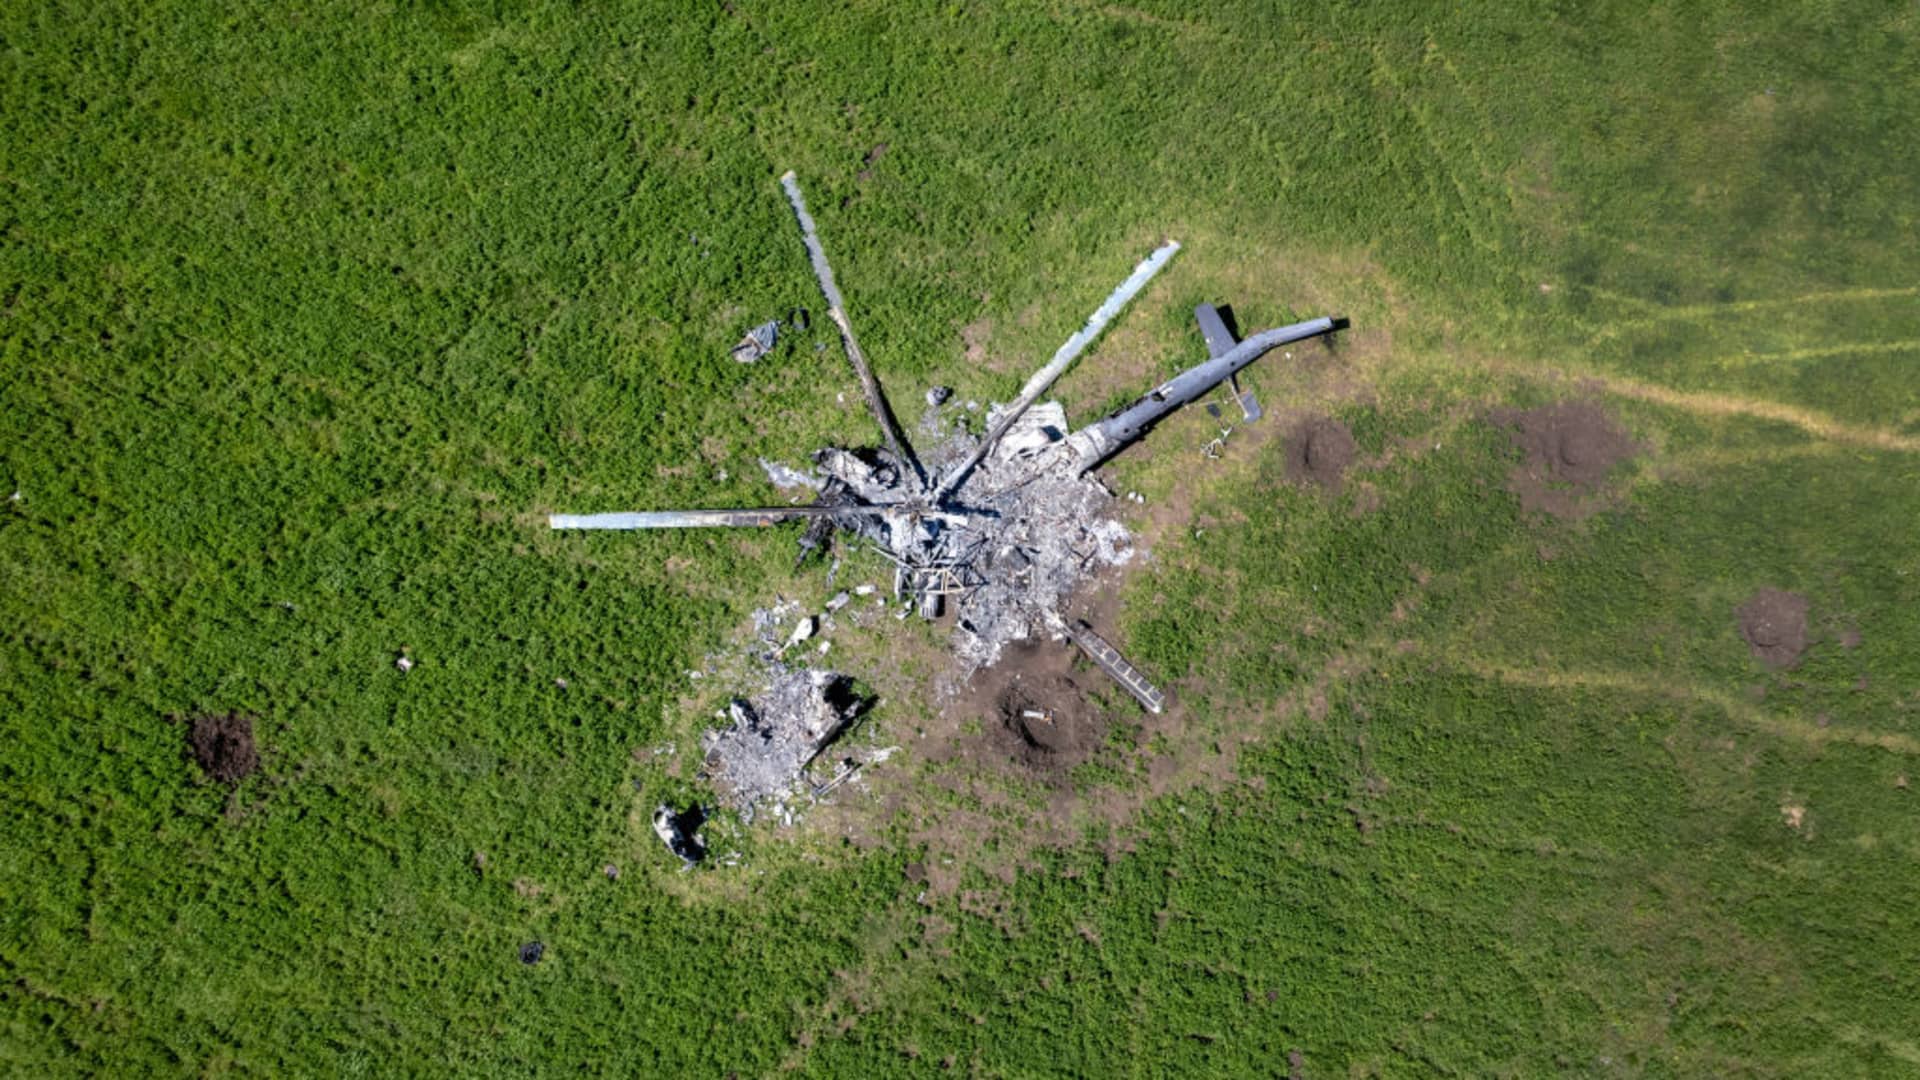 As seen from above, the remains of a Russian helicopter lies in a bomb-cratered field on May 16, 2022 in Biskvitne, Ukraine to the east of Kharkiv.